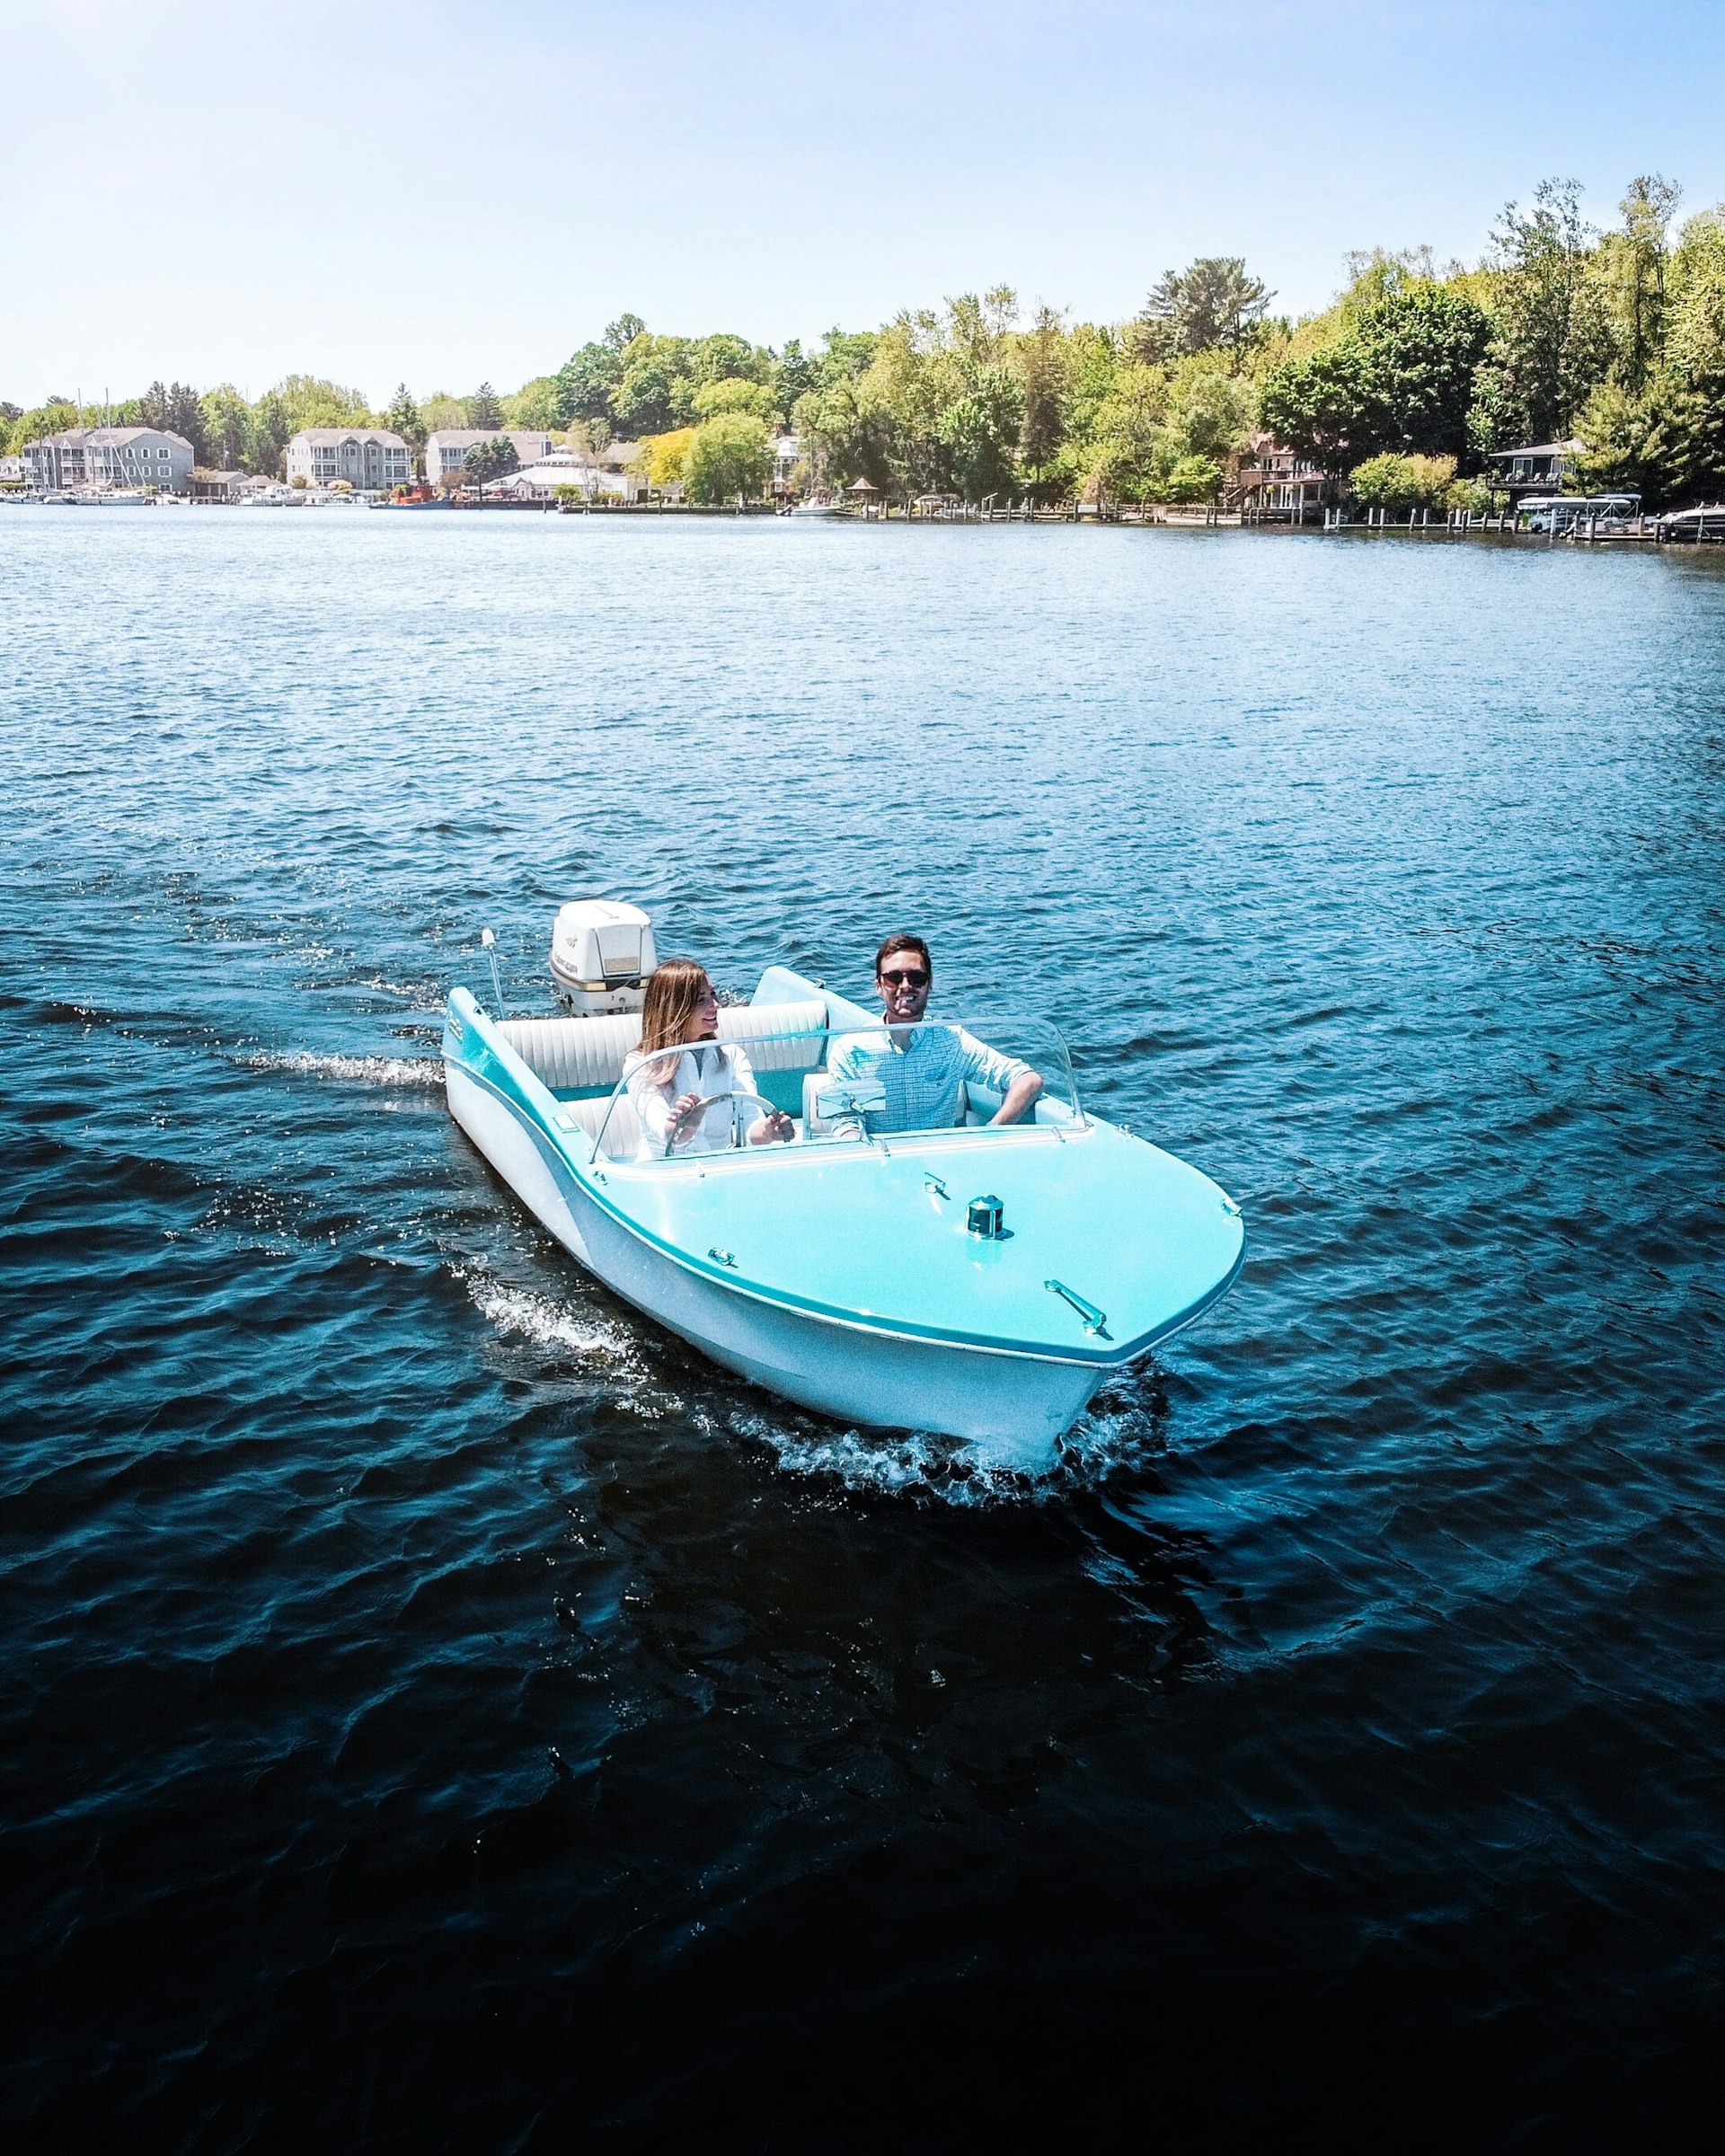 Two people ride in a light blue boat in an open body of water